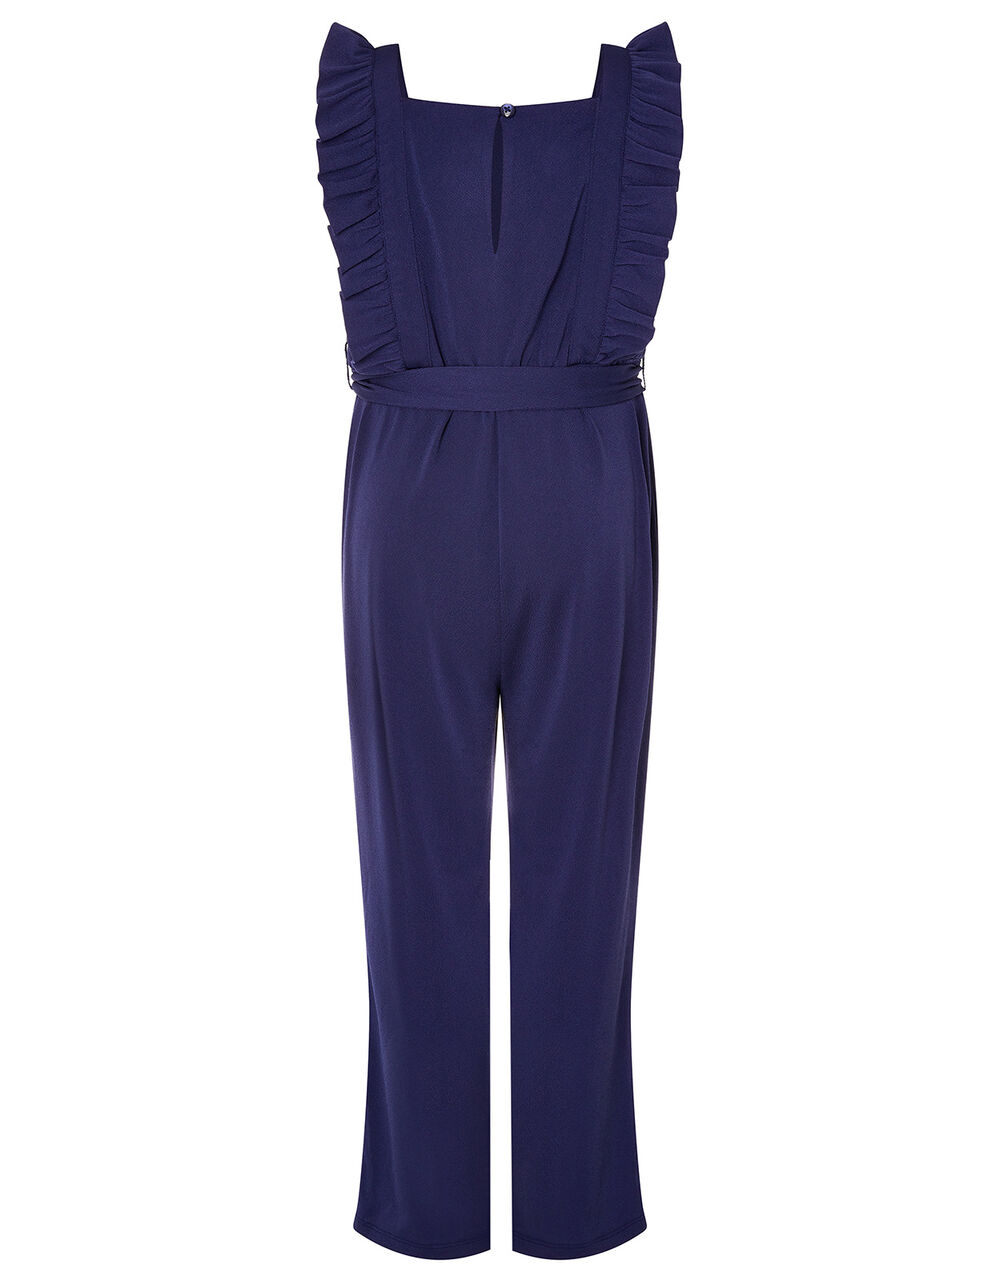 Sequin Frill Jumpsuit Blue | Girls' Jumpsuits & Playsuits | Monsoon Global.